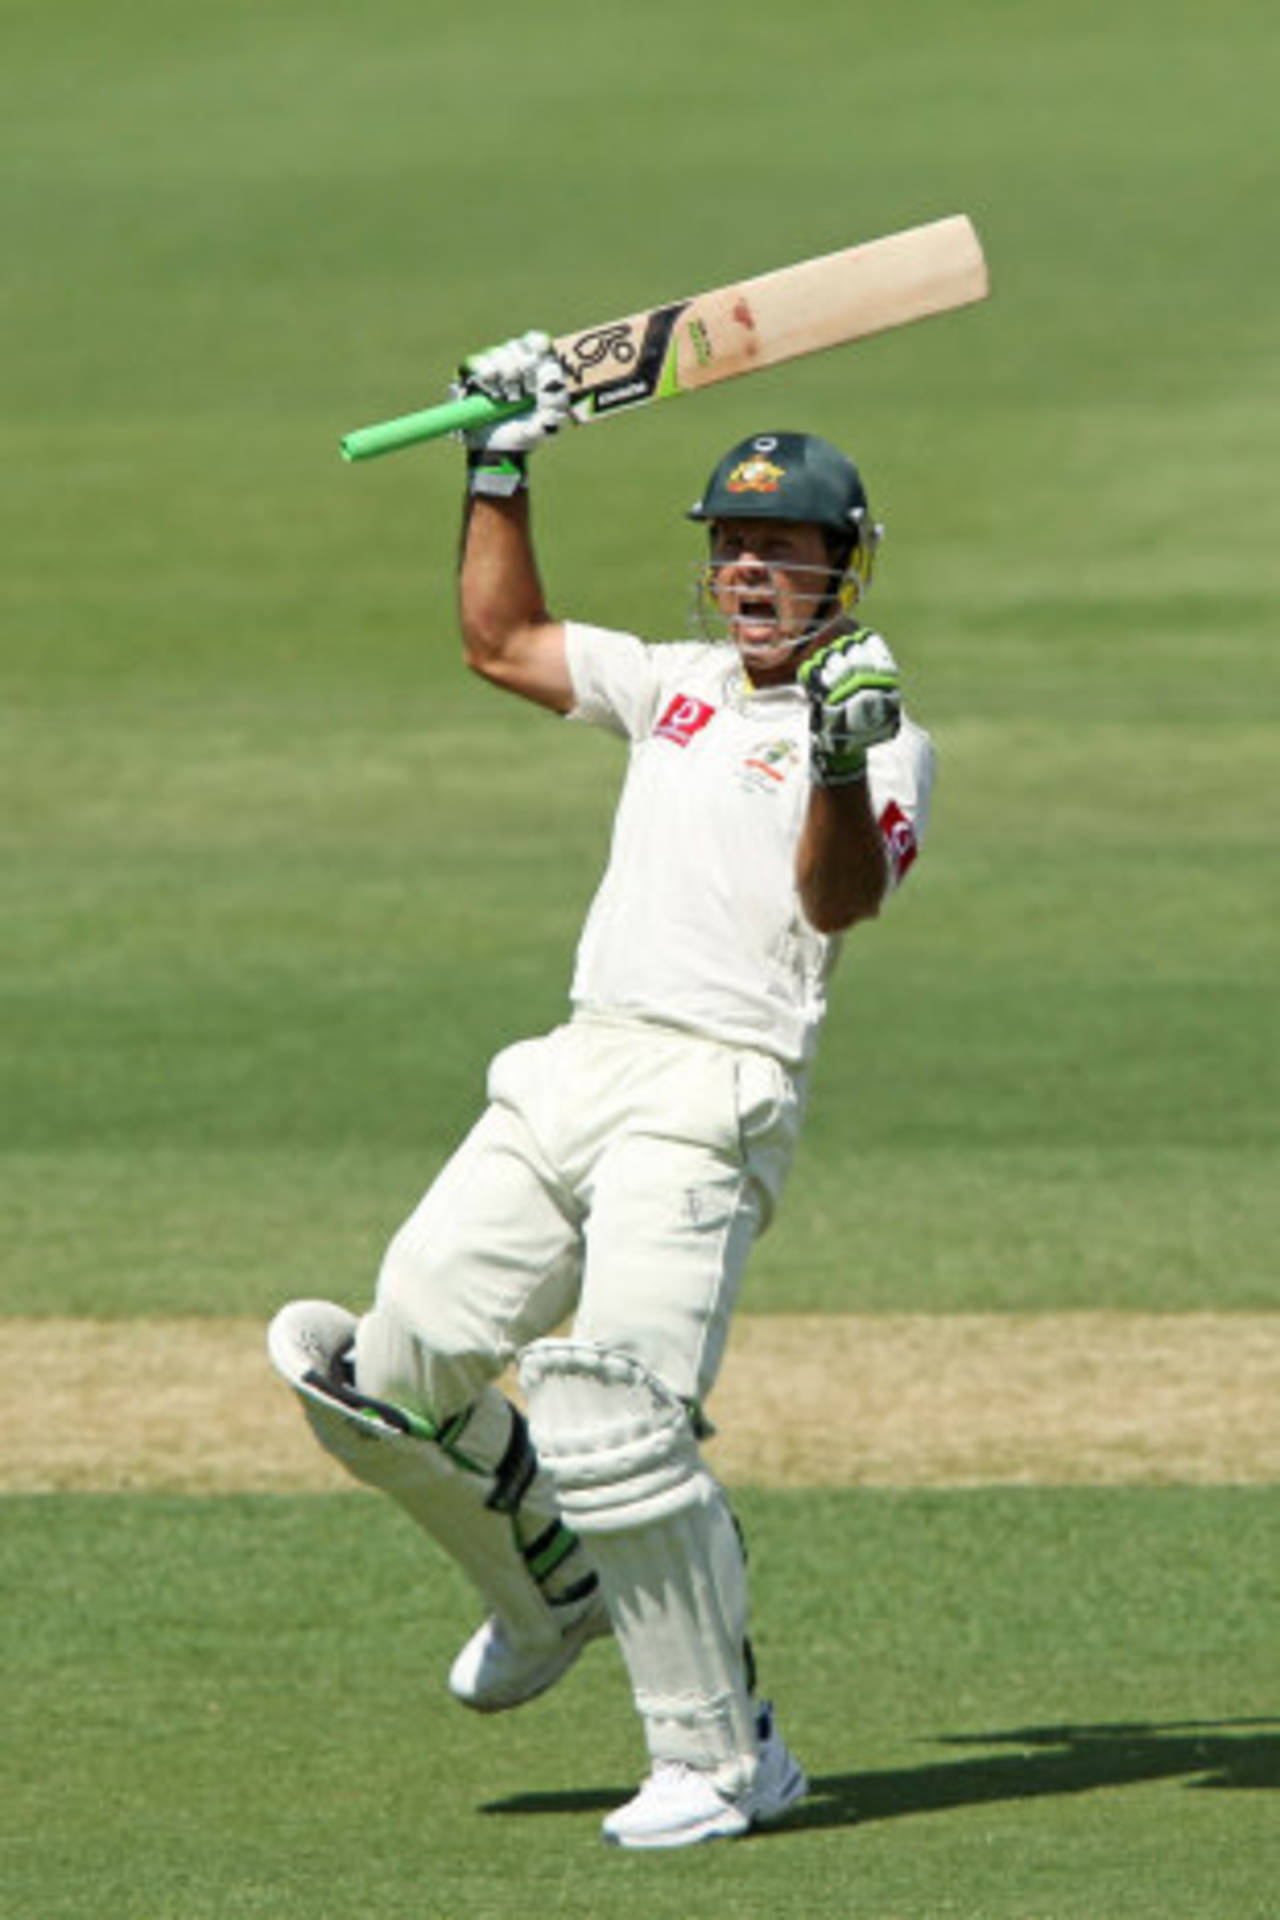 Ricky Ponting had a presence on the field because of his aggressive batting style&nbsp;&nbsp;&bull;&nbsp;&nbsp;Getty Images